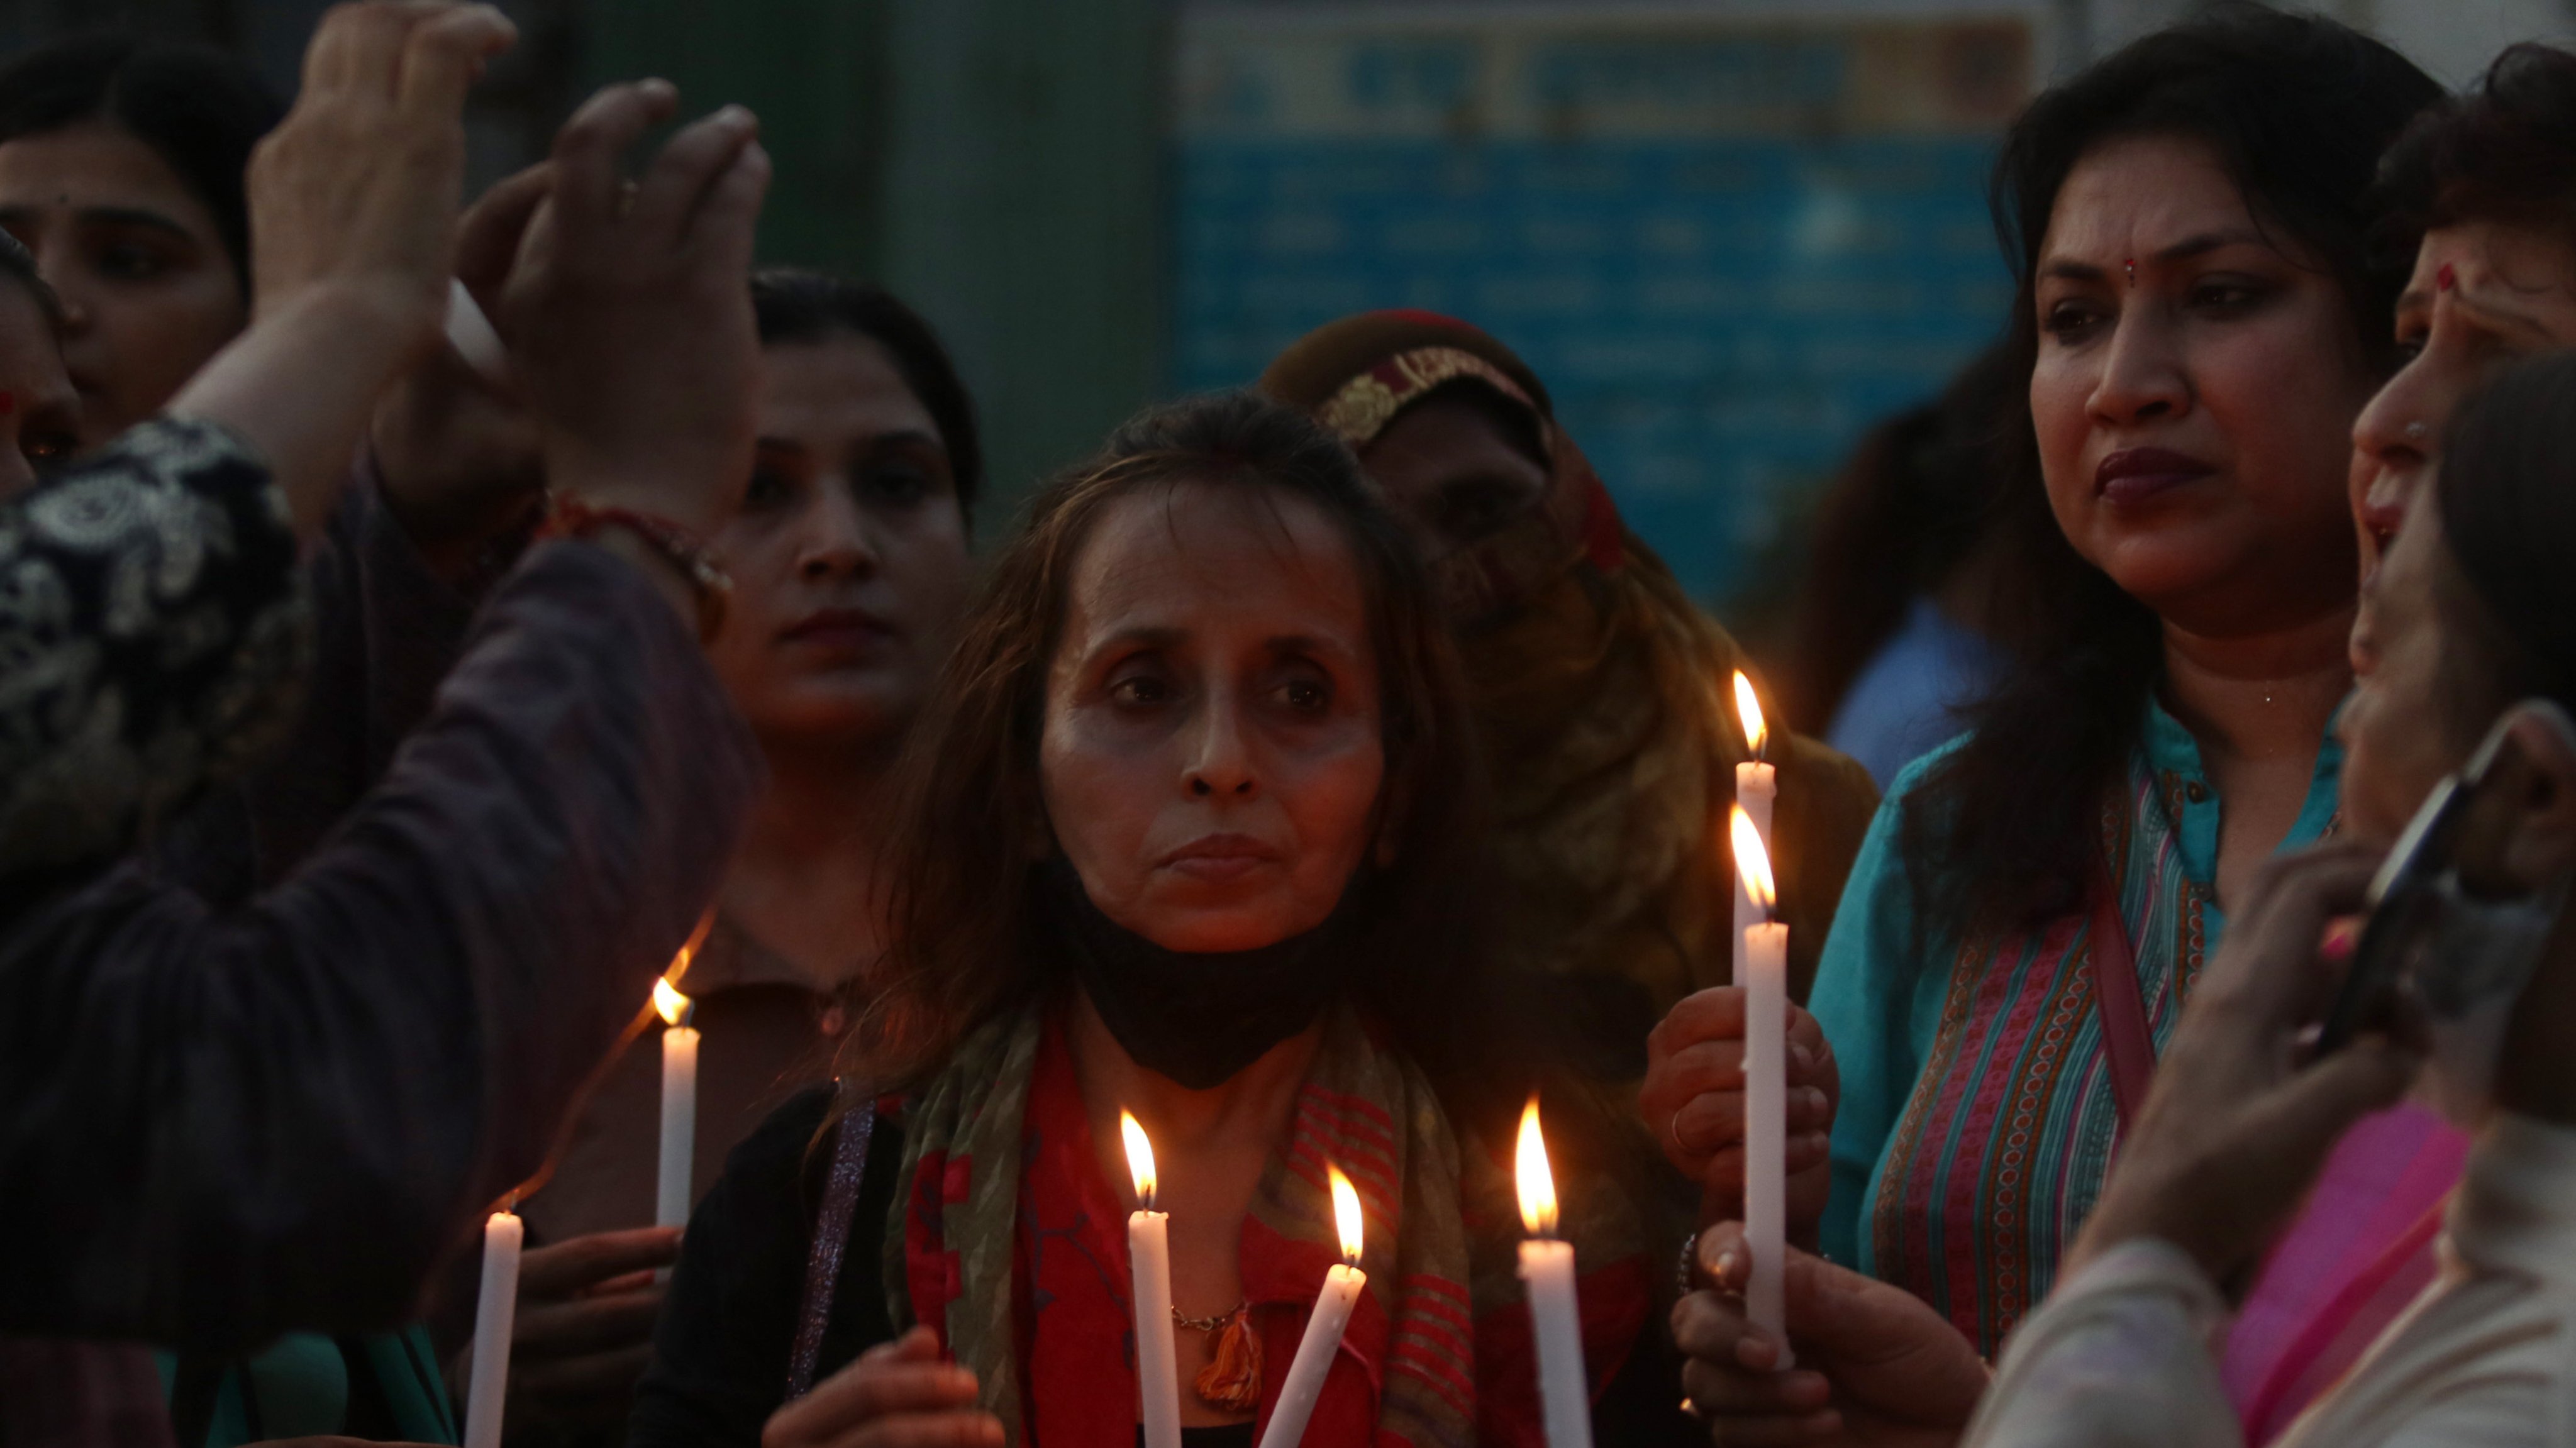 Protest in New Delhi against murder of young woman